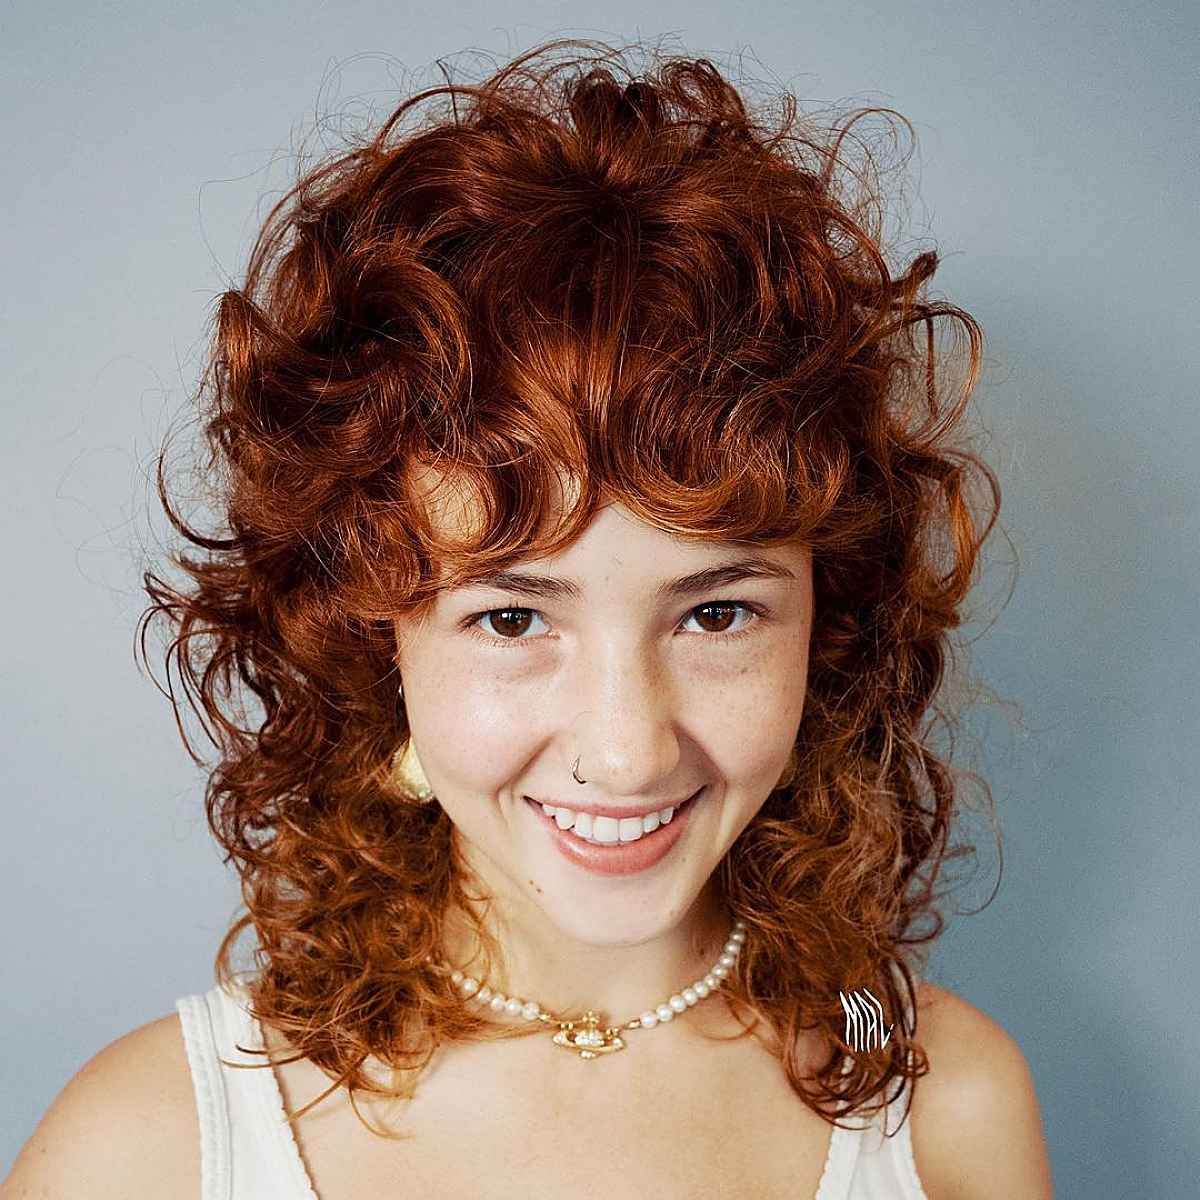 Edgy Shaggy Cut for Curly Girls